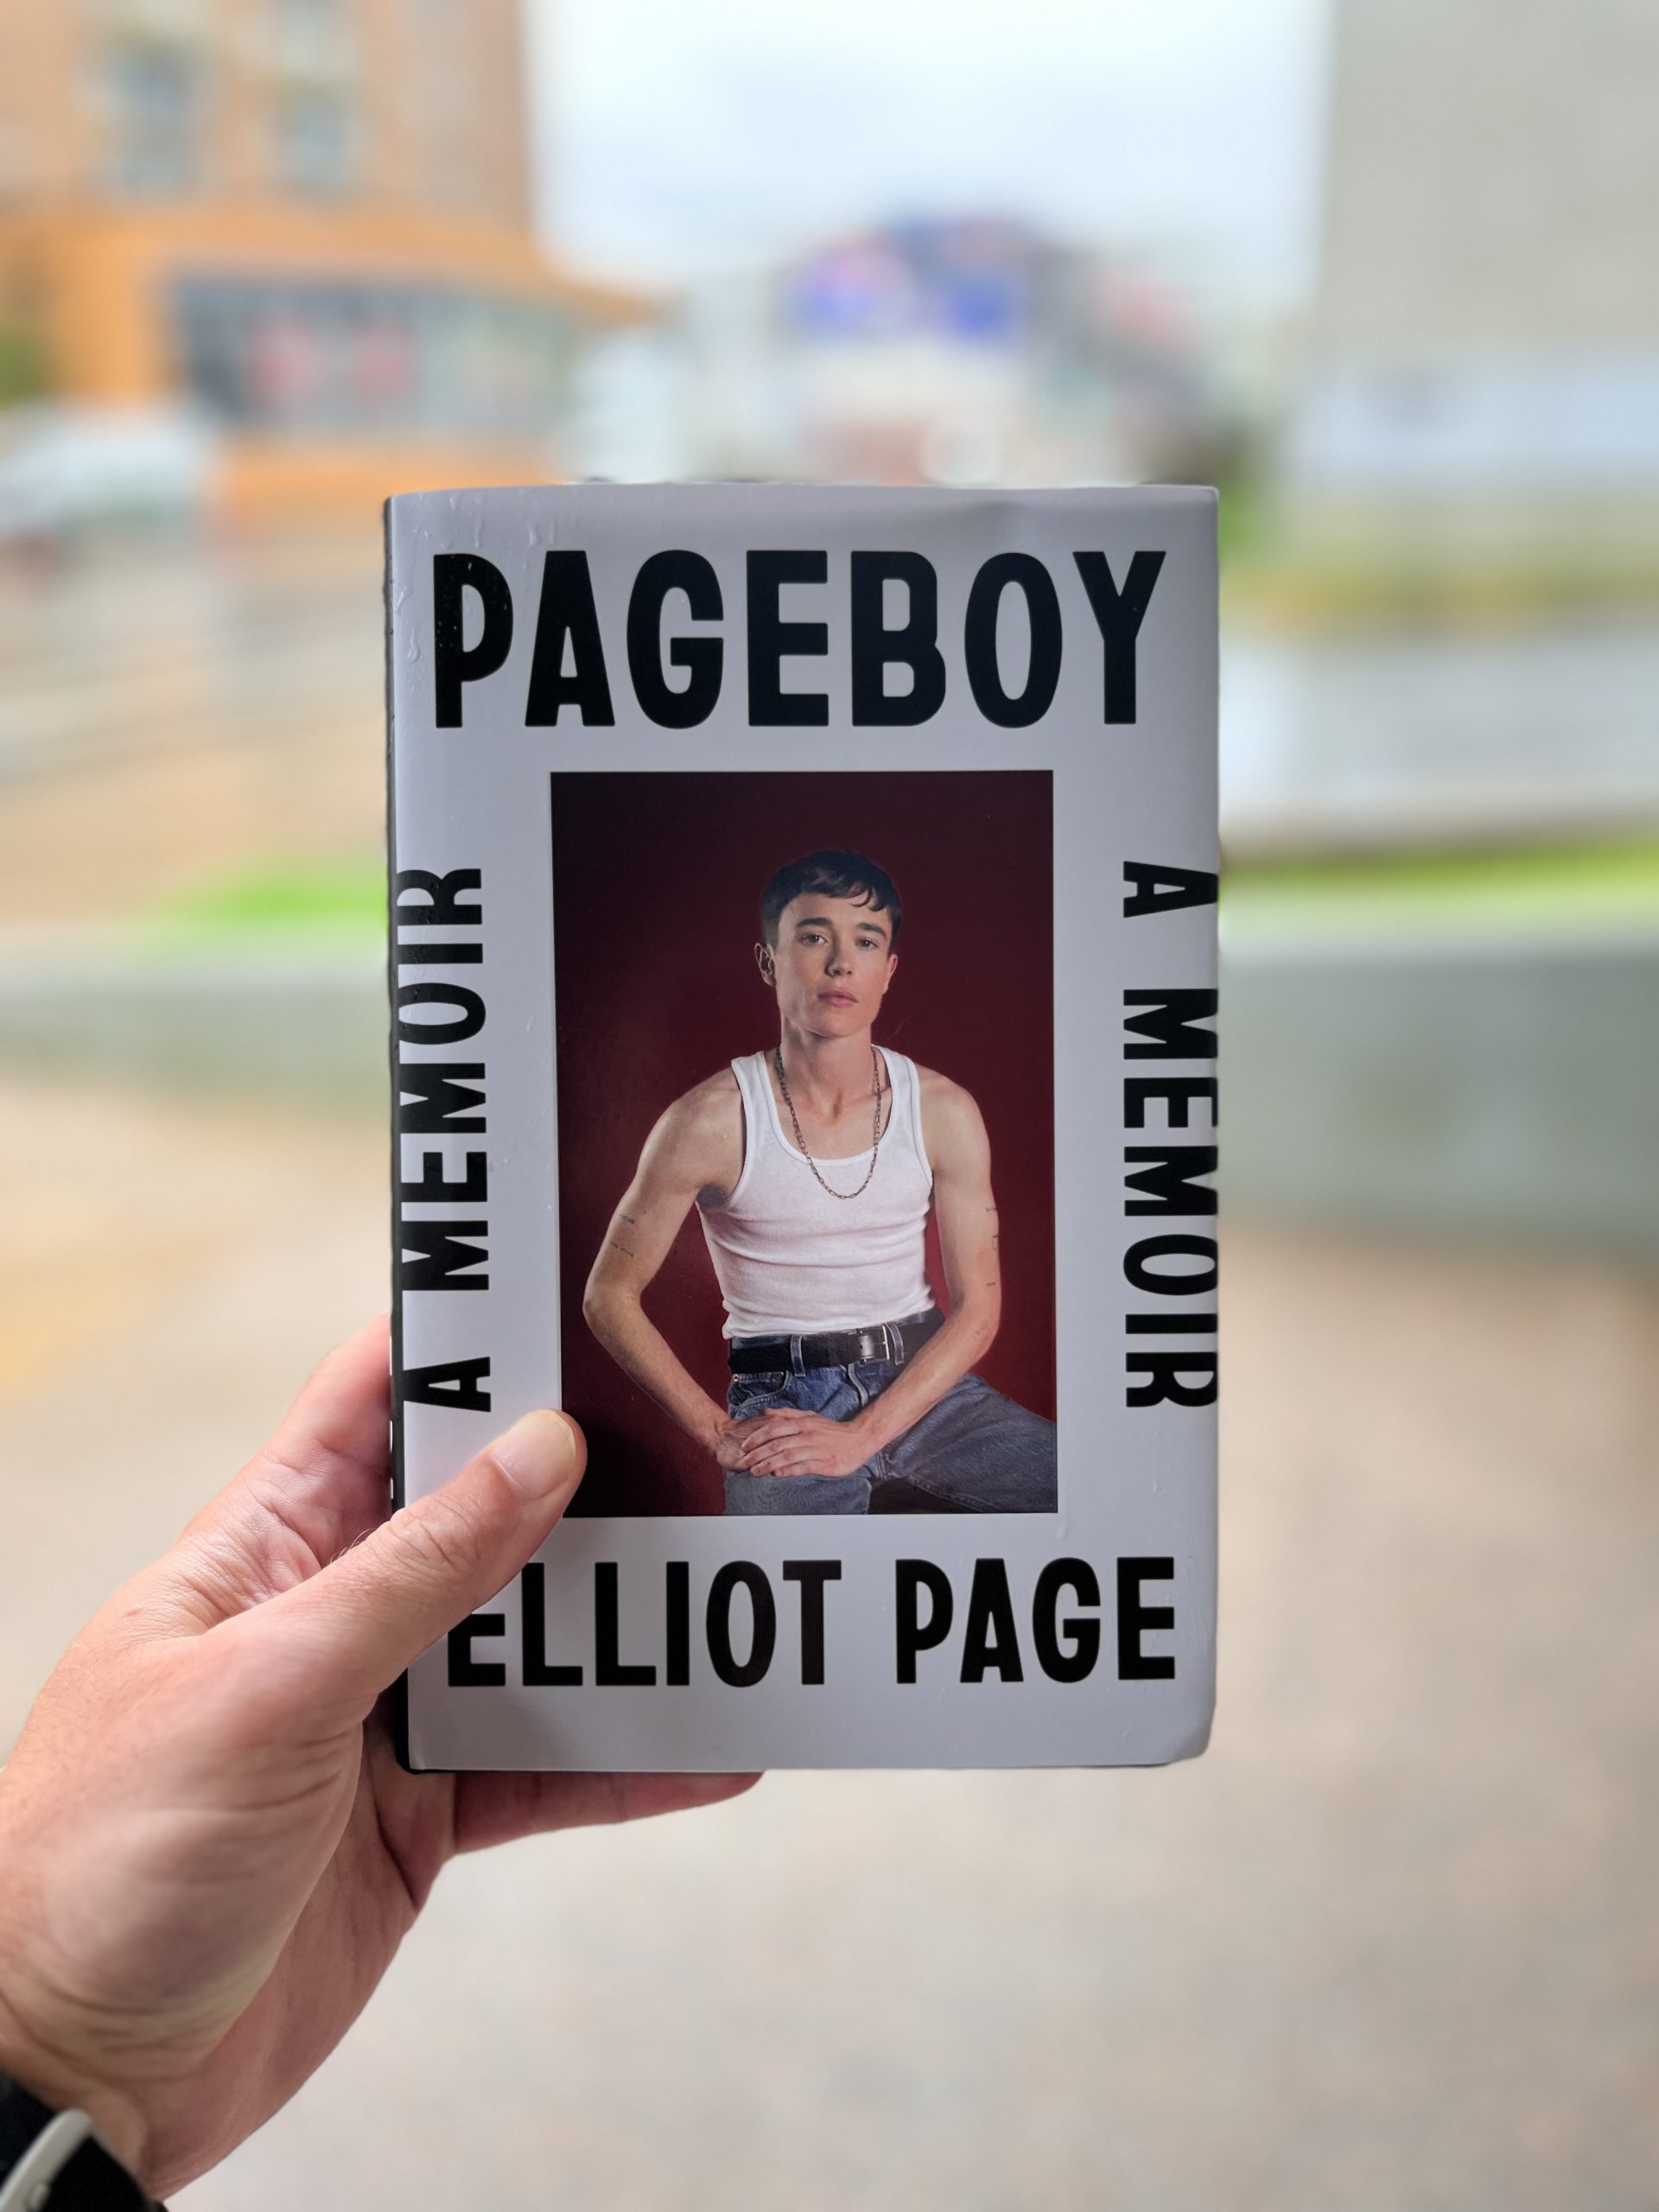 Pageboy sheds the livery in Elliot Page’s powerful autobiography